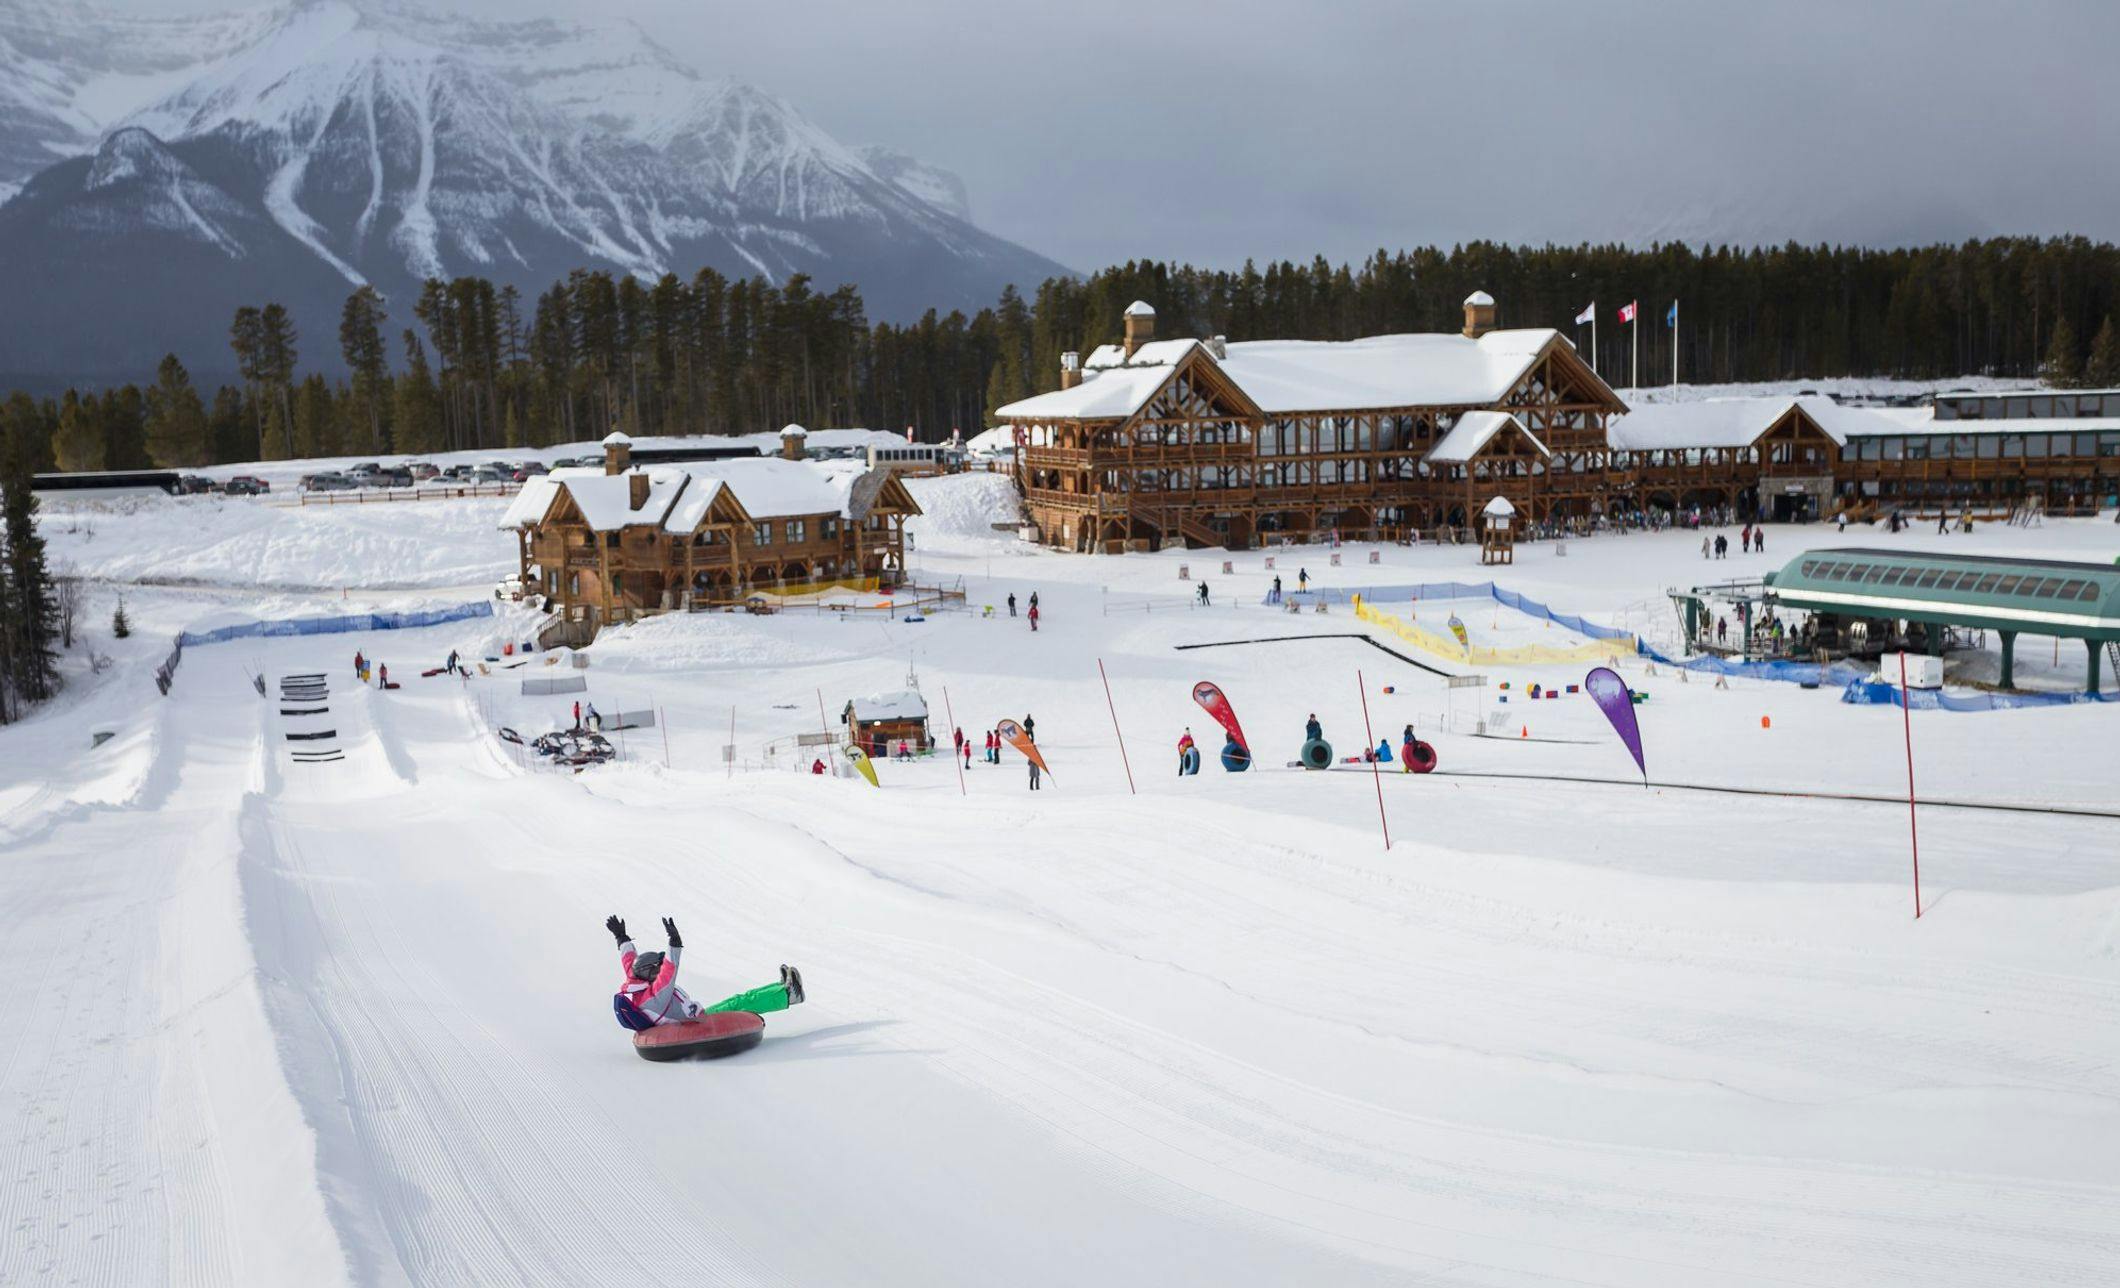 A child tubing down a long run with the Lake Louise Ski Resort chalets in the background